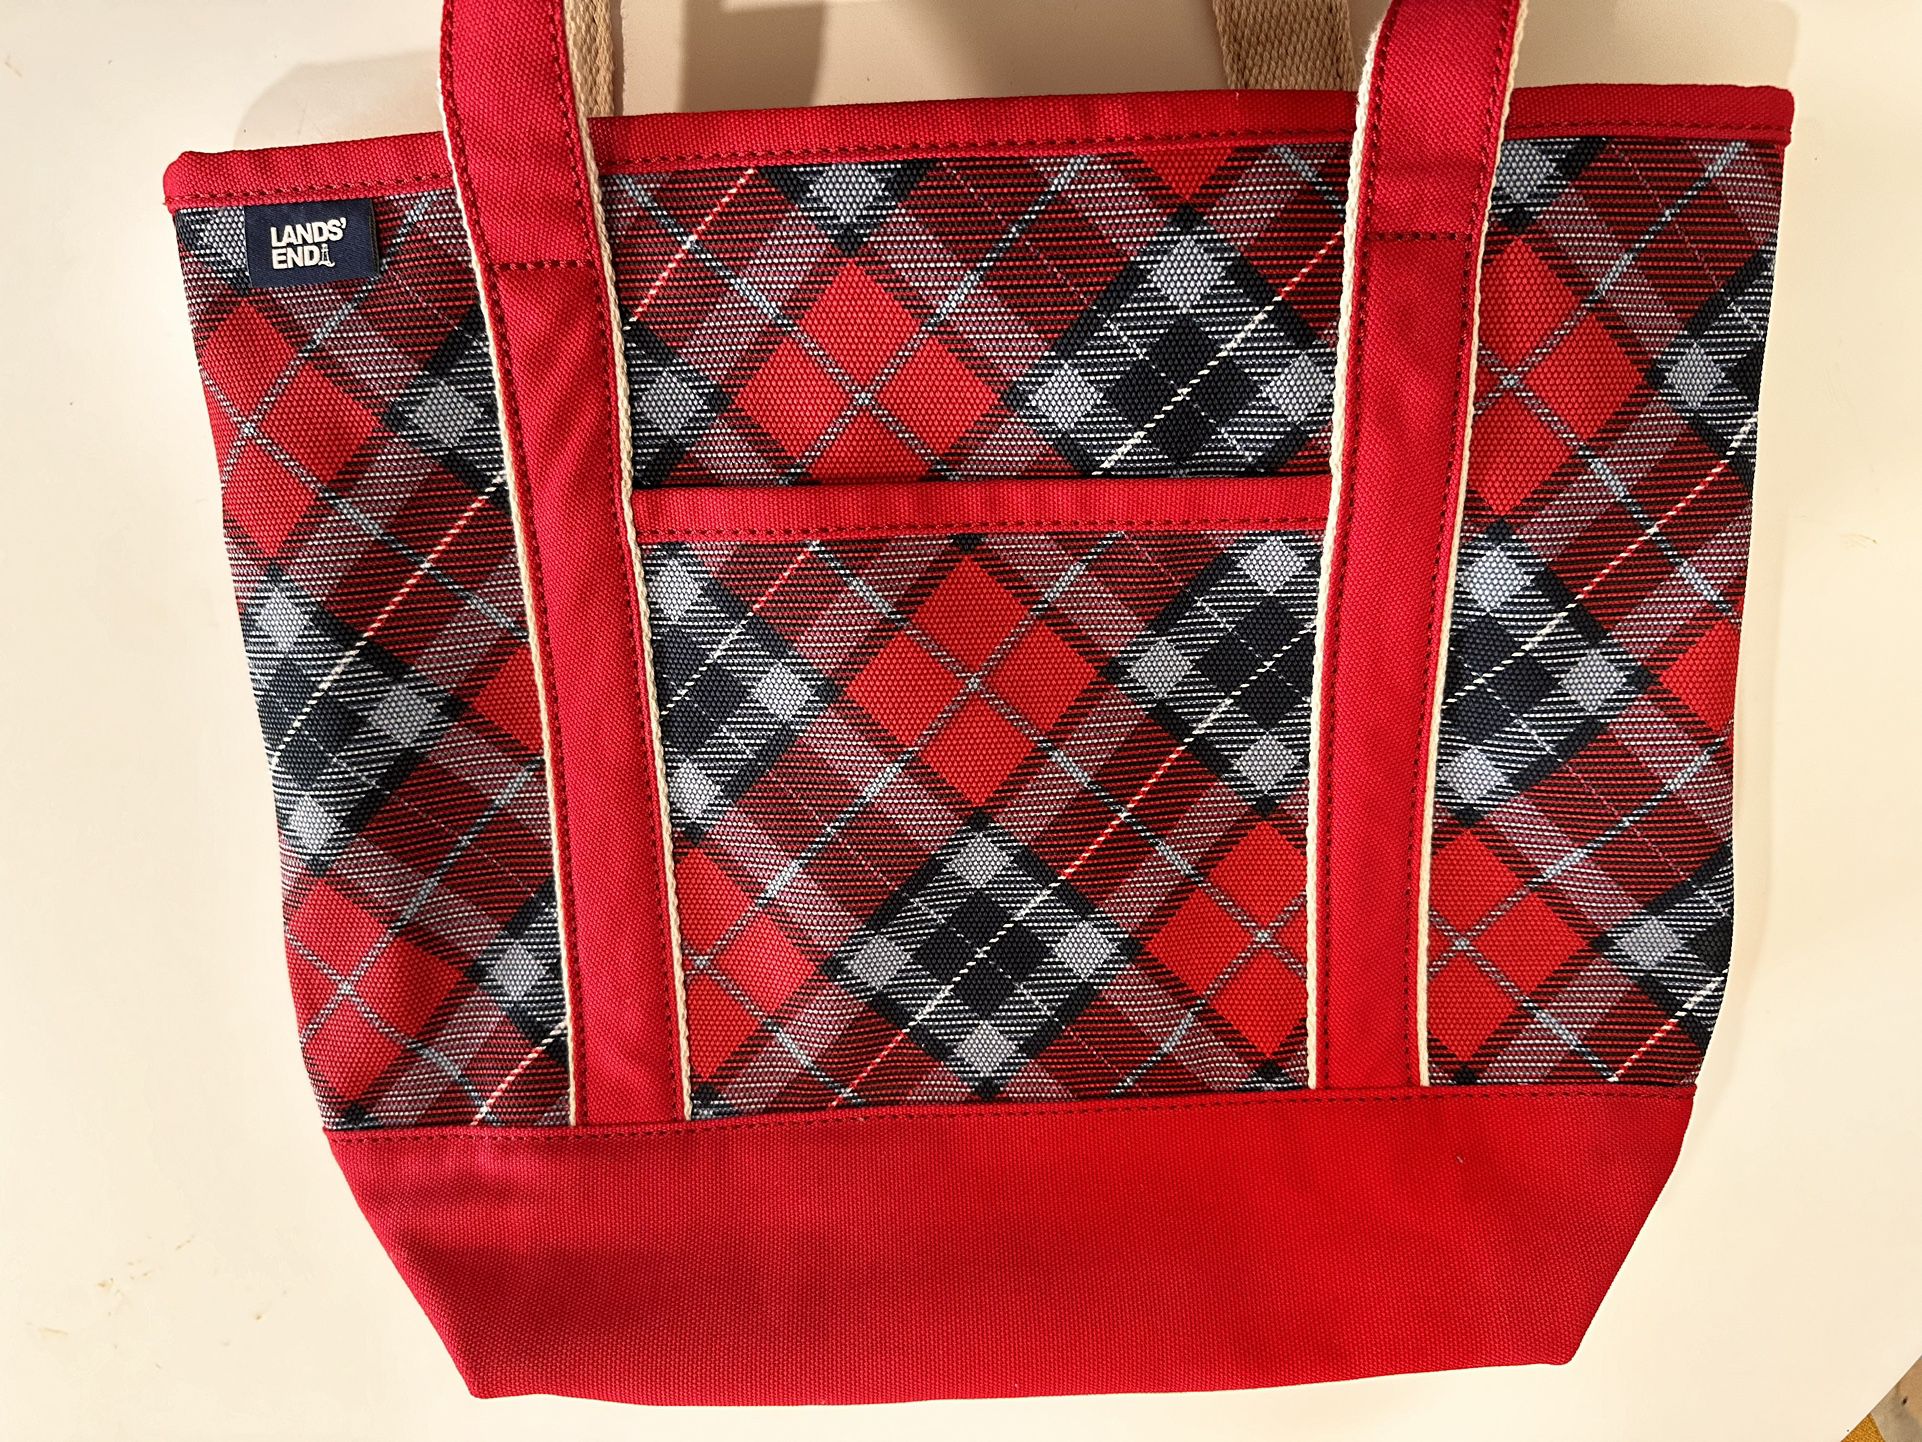 Lands End Brand -Large Red And blue Plaid Tote Bag, Sturdy Fabric, New, Mothers Day Present 